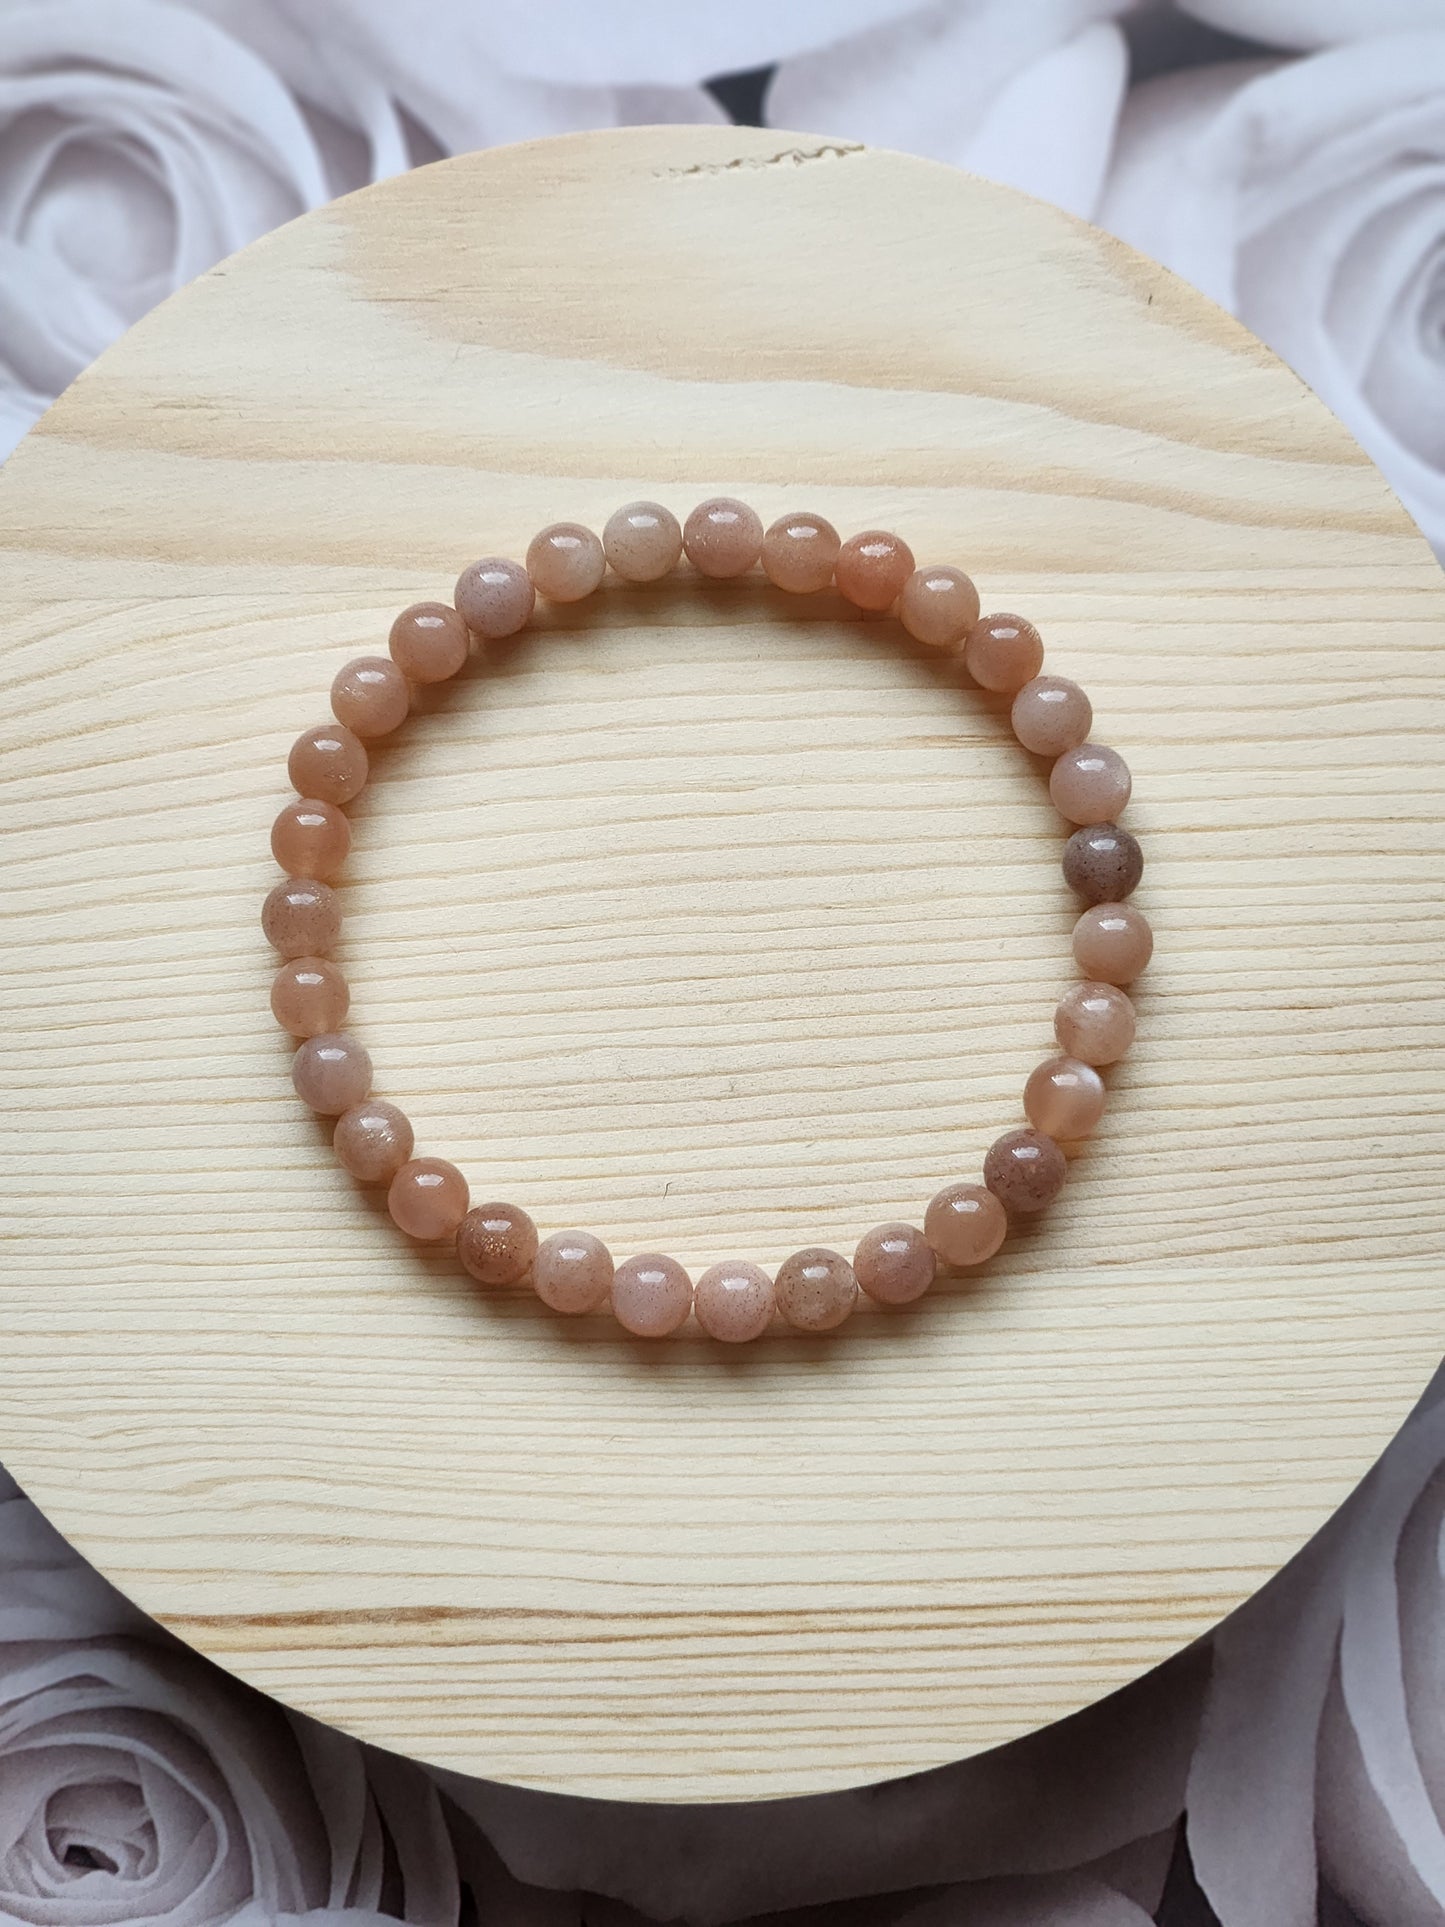 Peach Moonstone Bracelet - 6mm stones - acceptance - dreaming - soothing - goodness